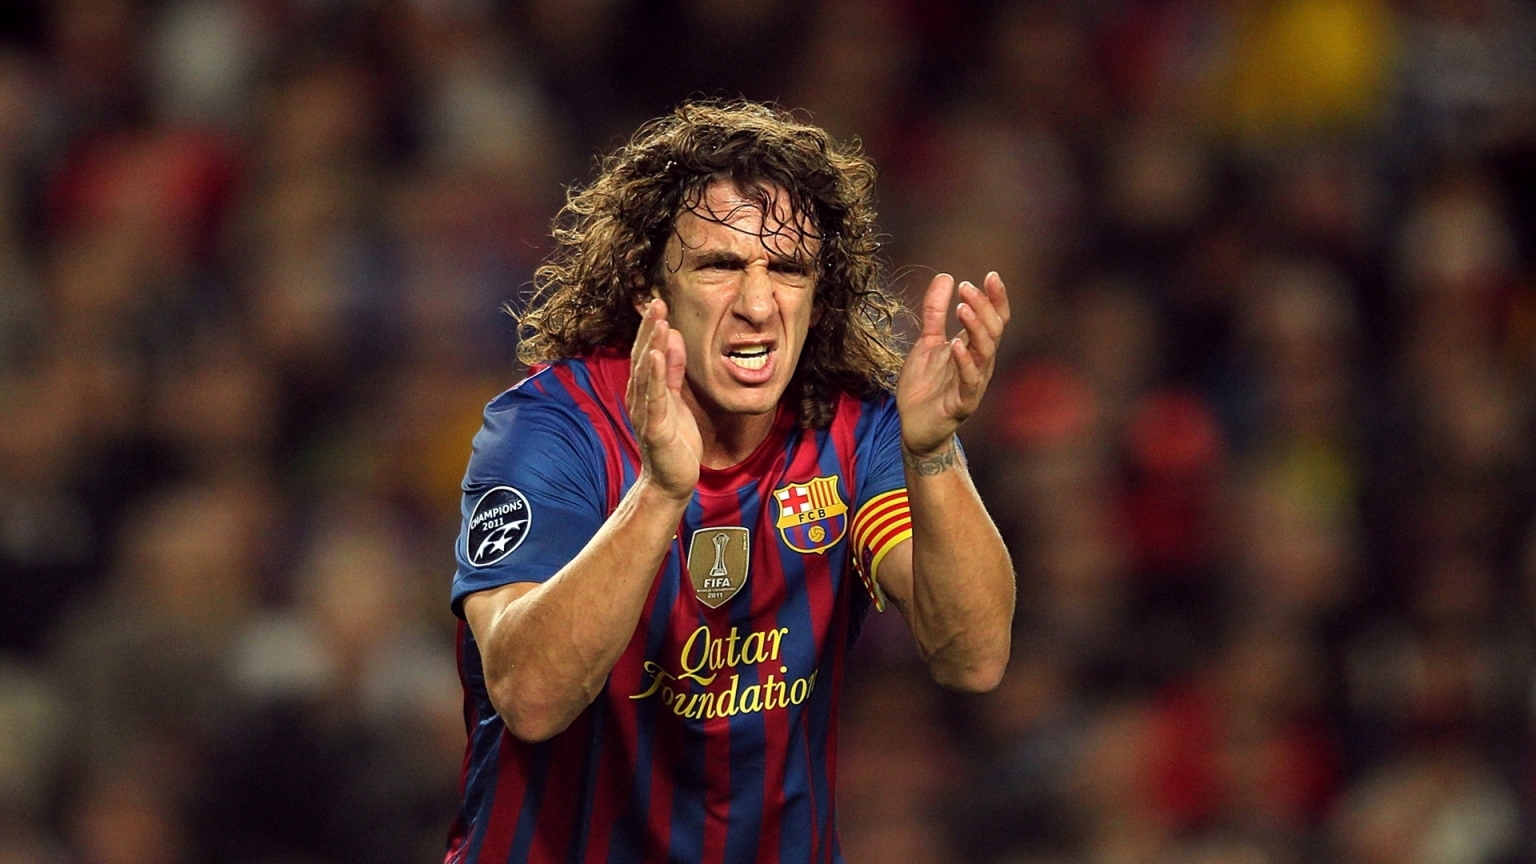 Carles Puyol Urging for 1536 x 864 HDTV resolution